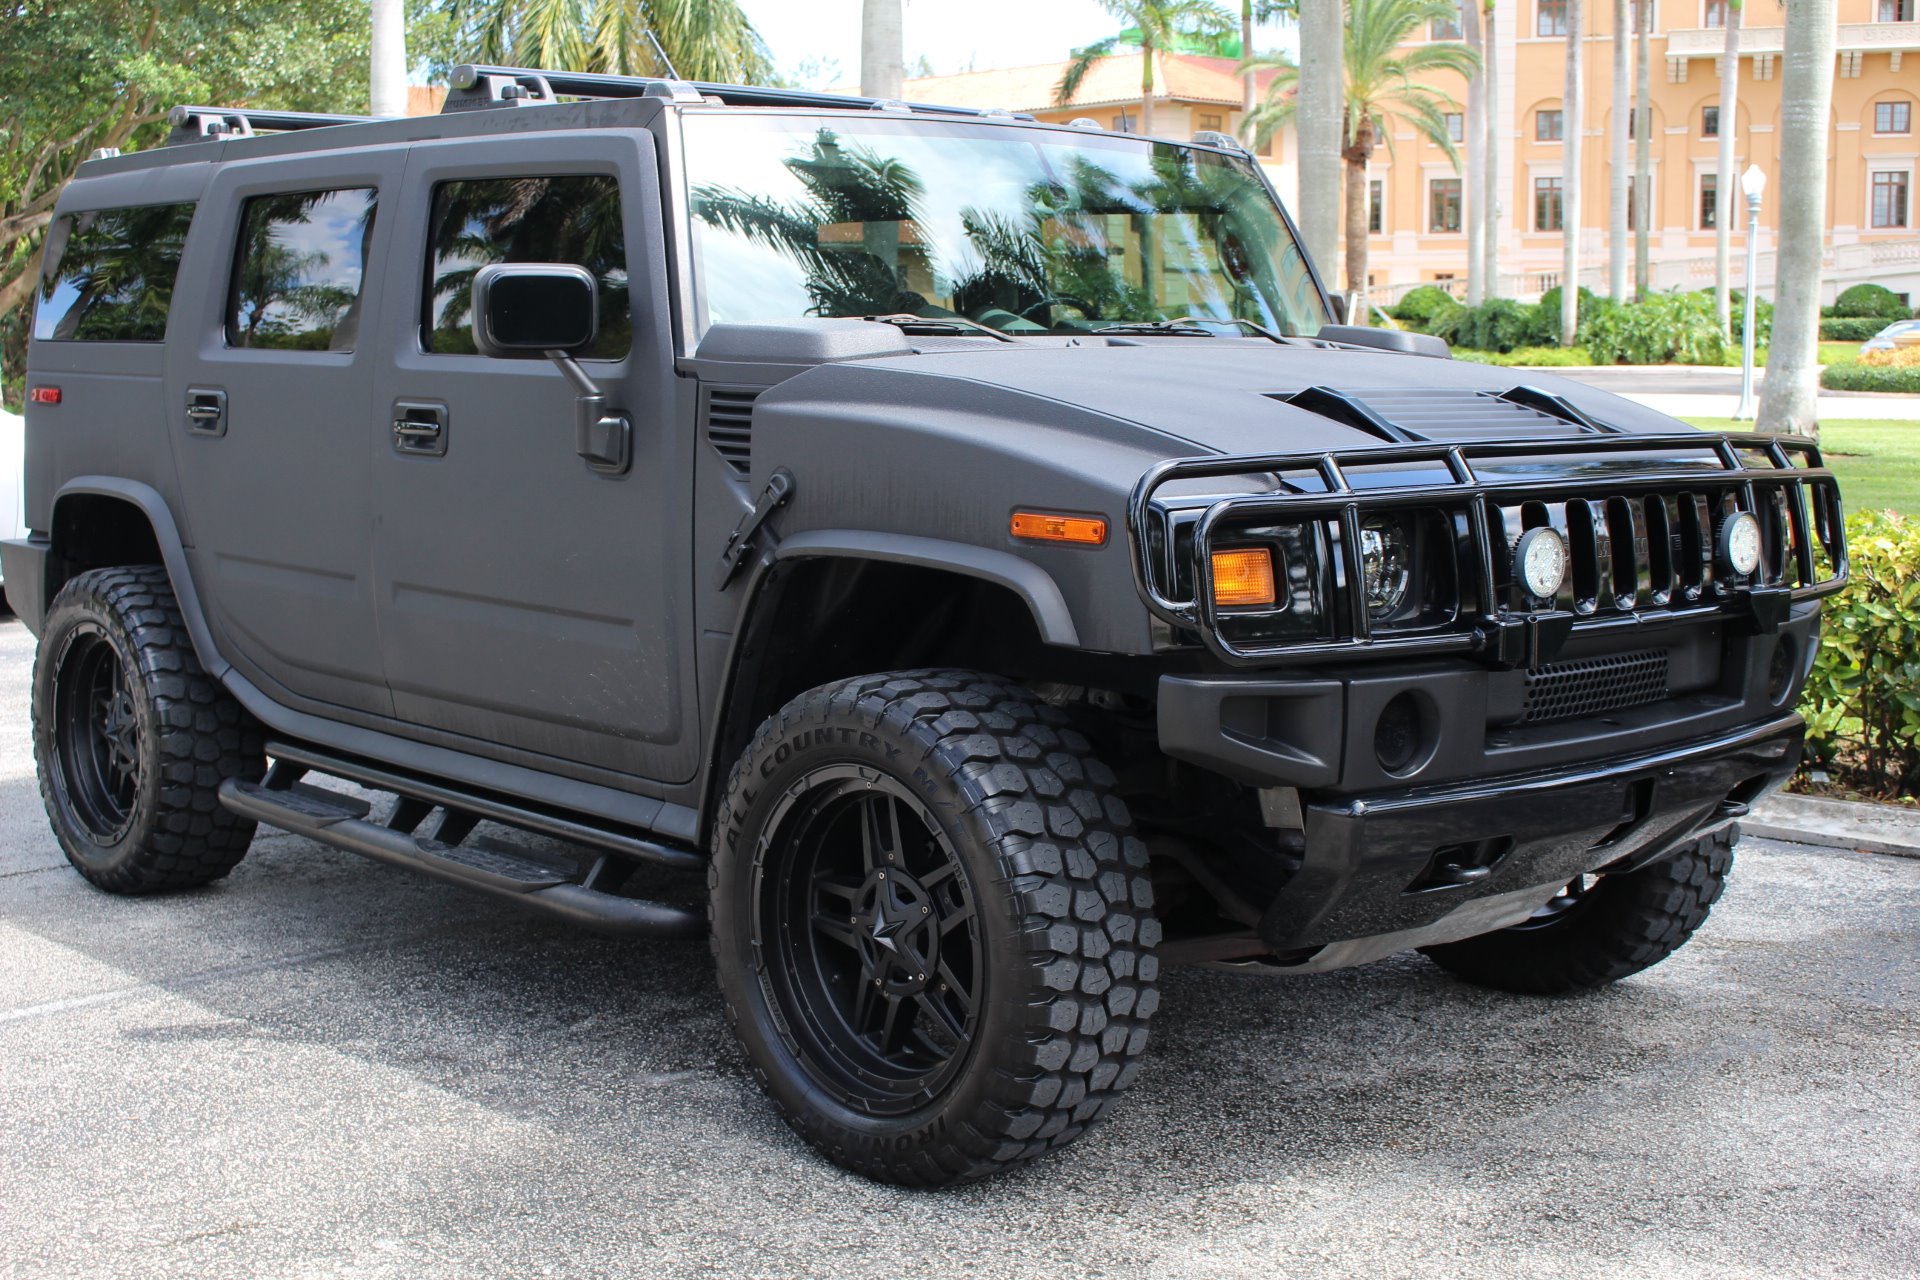 Used 2003 HUMMER H2 Lux Series for sale Sold at The Gables Sports Cars in Miami FL 33146 3